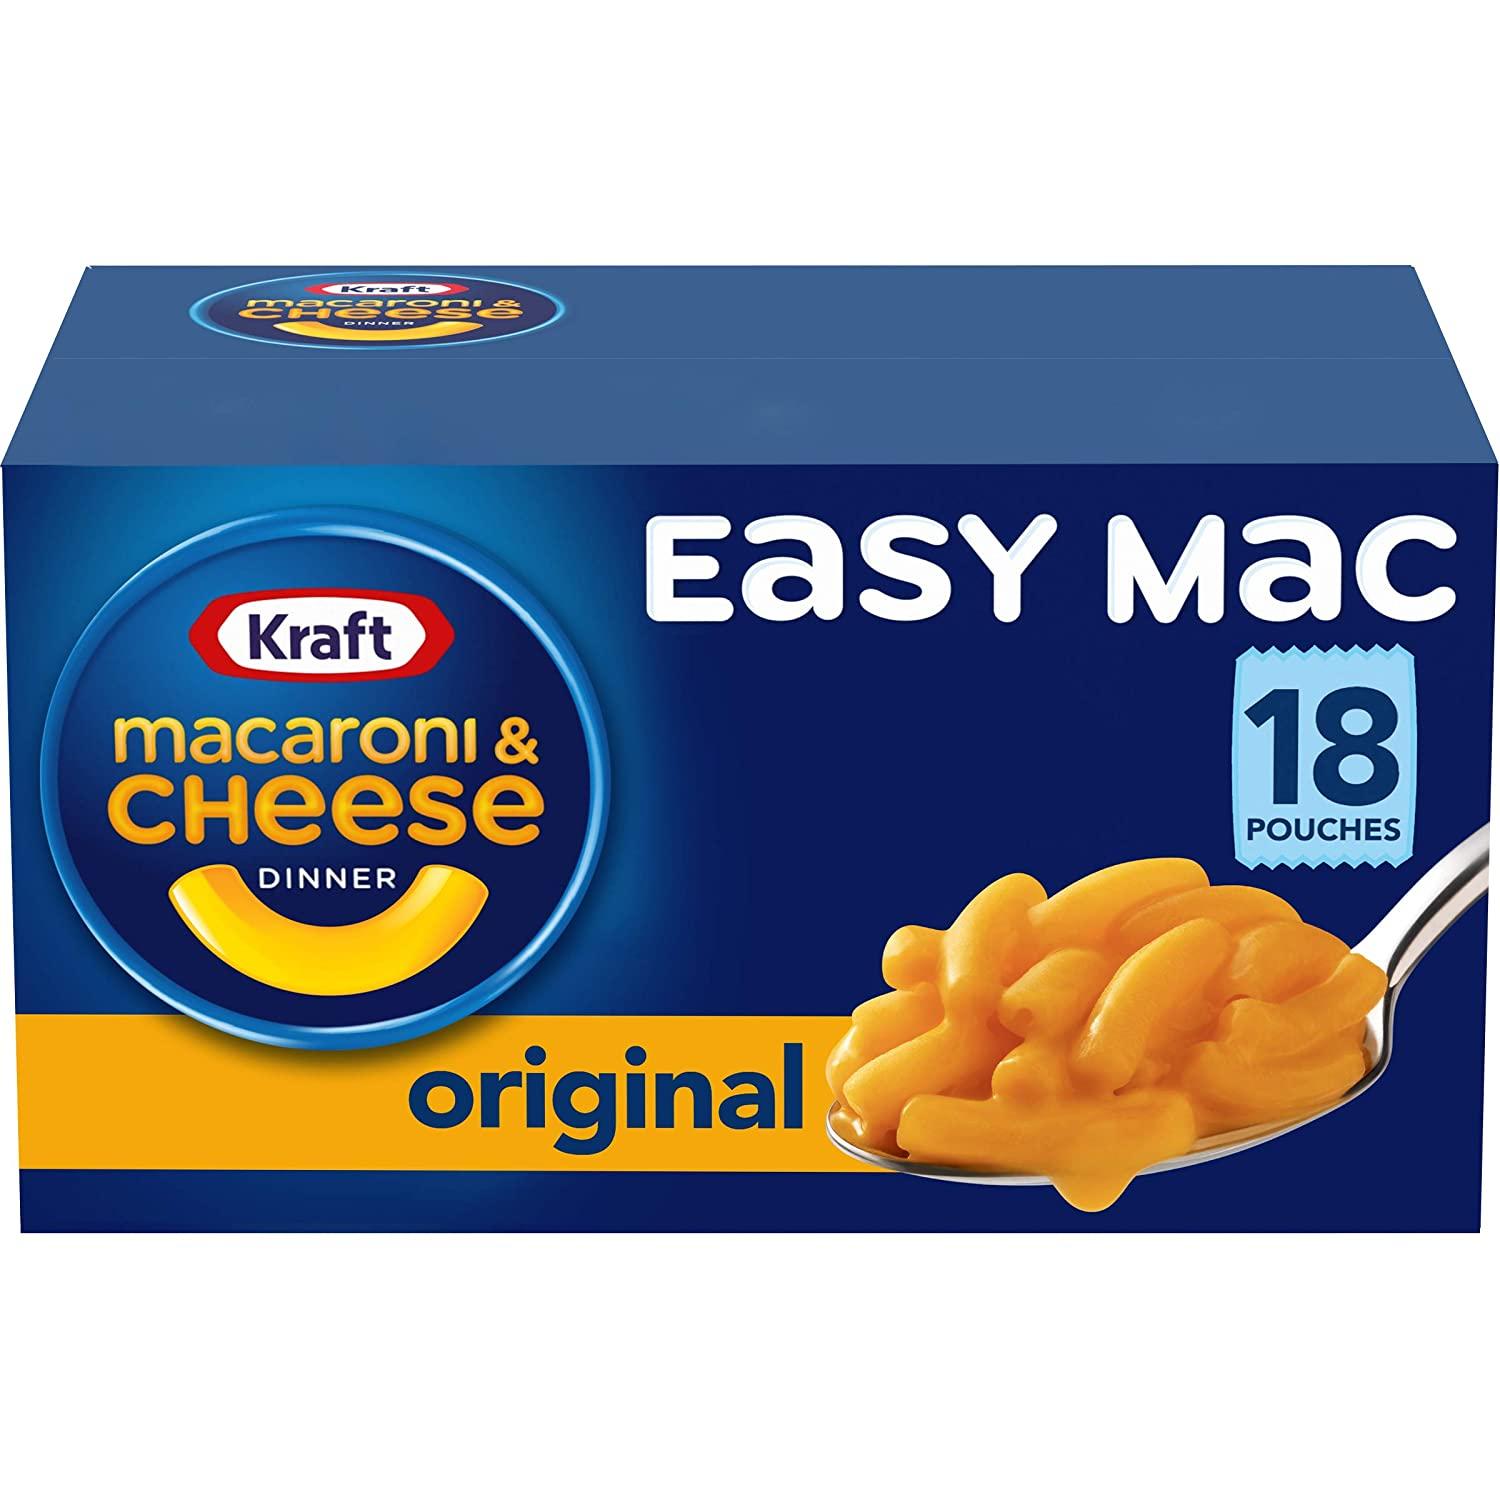 18 Kraft Easy Mac Original Flavor Macaroni and Cheese Meal for $6.16 Shipped